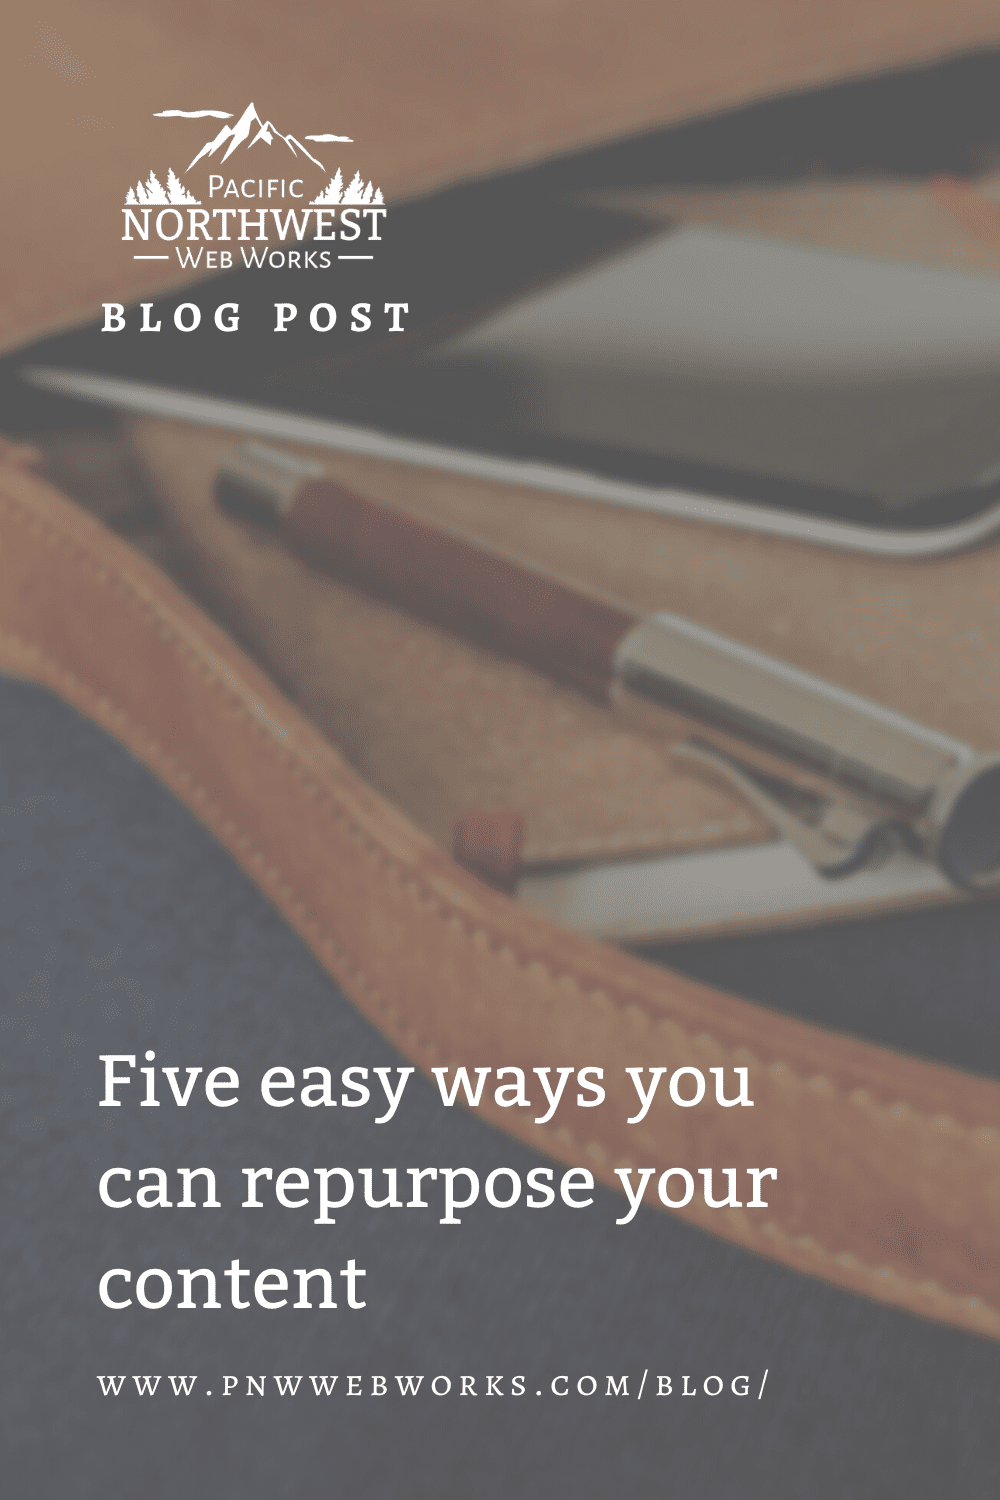 Five easy ways you can repurpose your content